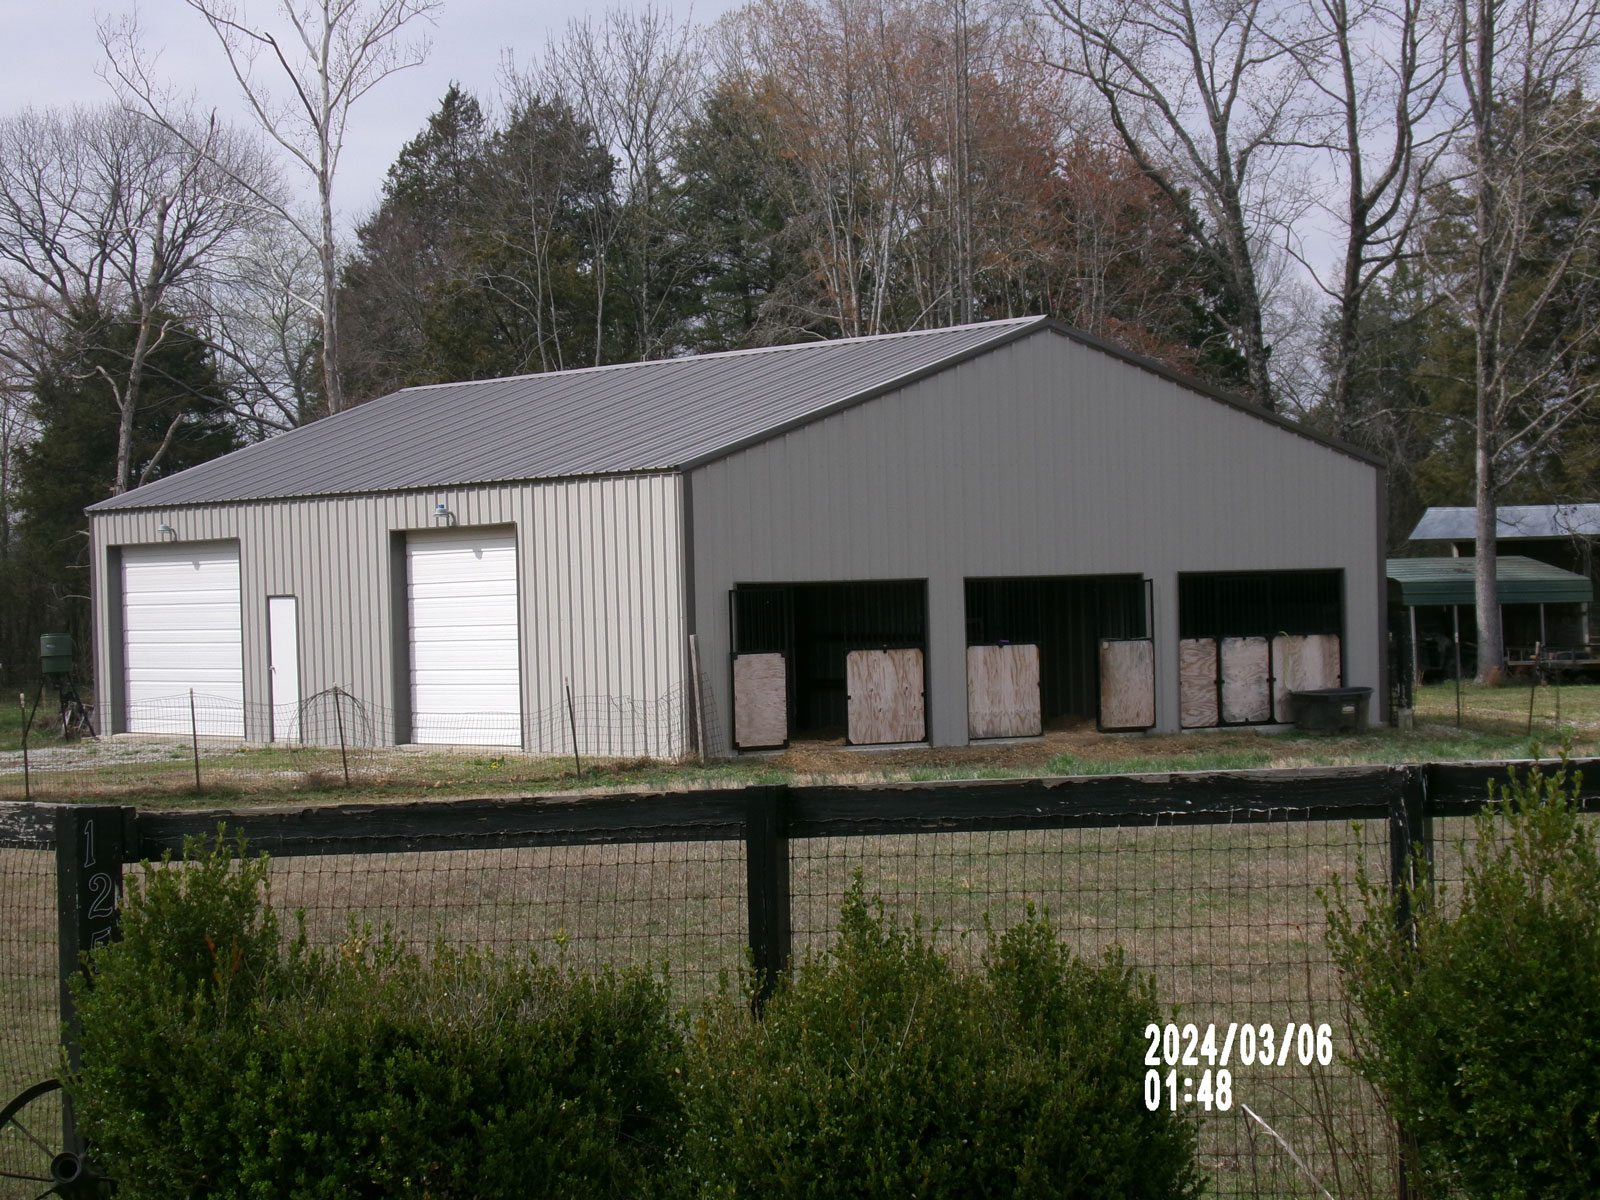 40’x60’x18’ Stable with 2 14x14 roll up doorsRed iron column frame 26 gauge roof 26 gauge walls Wickliff KY approx location 2-14’x14’ roll up door 3” roof and wall insulation insulation 1-3070 steel walk doors 3- 12x10 openings on endwall